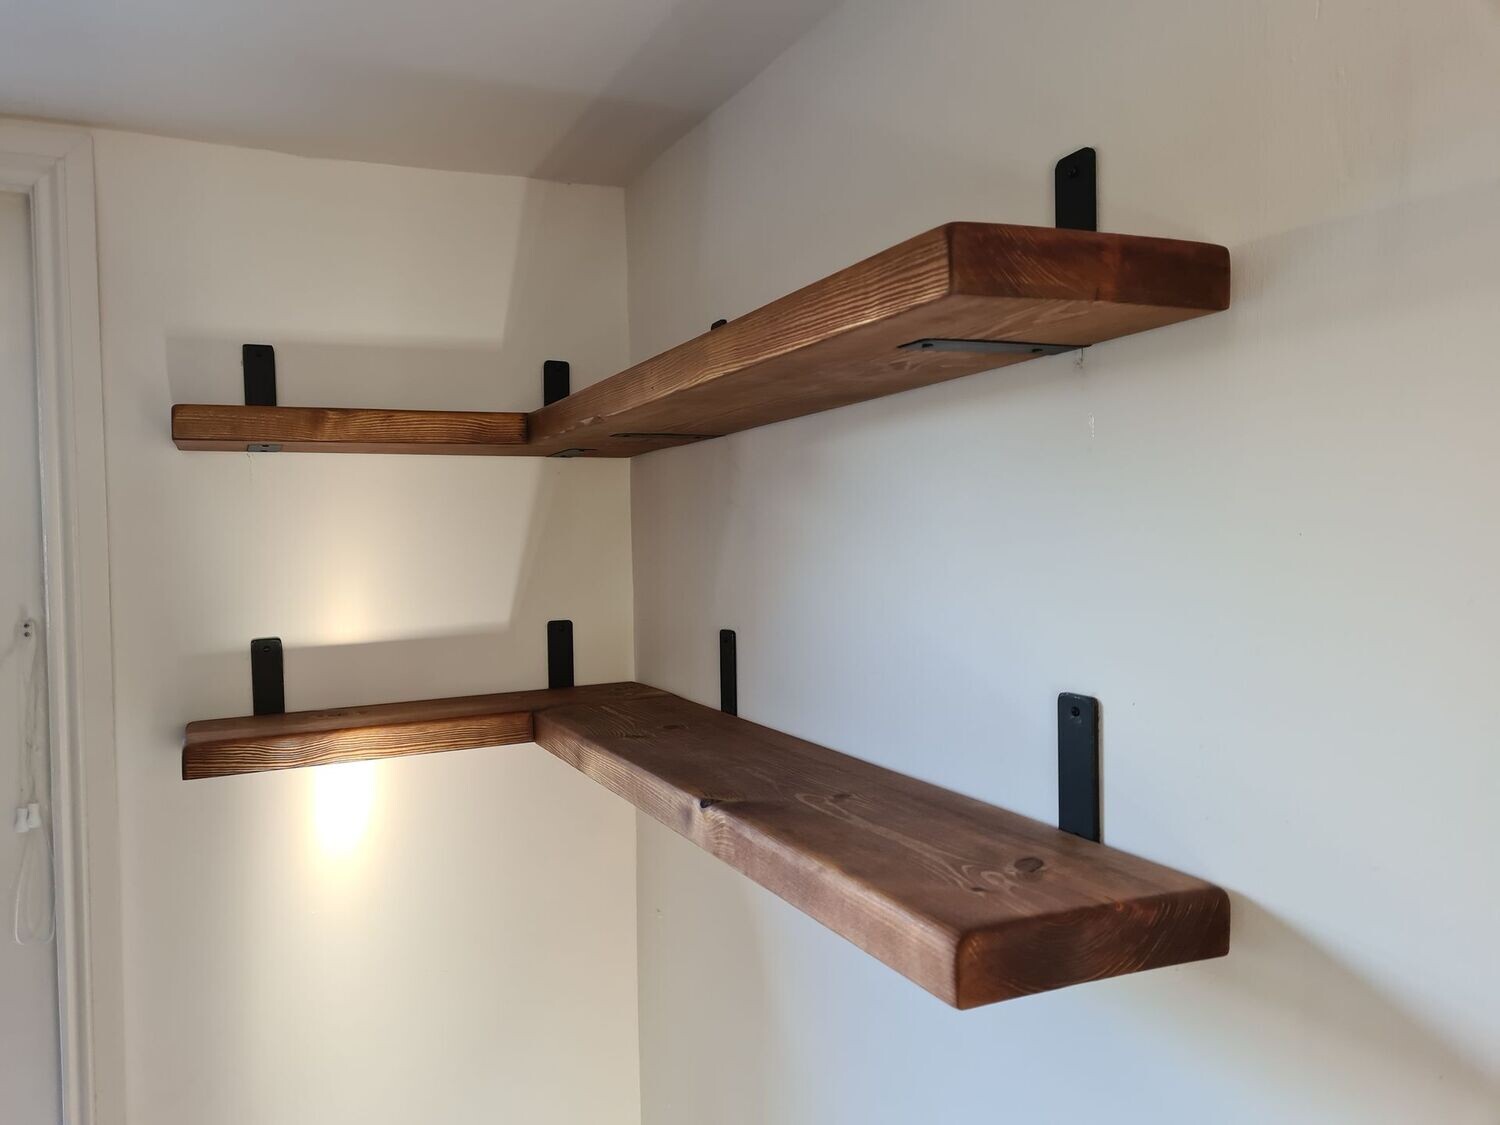 Corner shelves - Reclaimed Timber and industrial style brackets